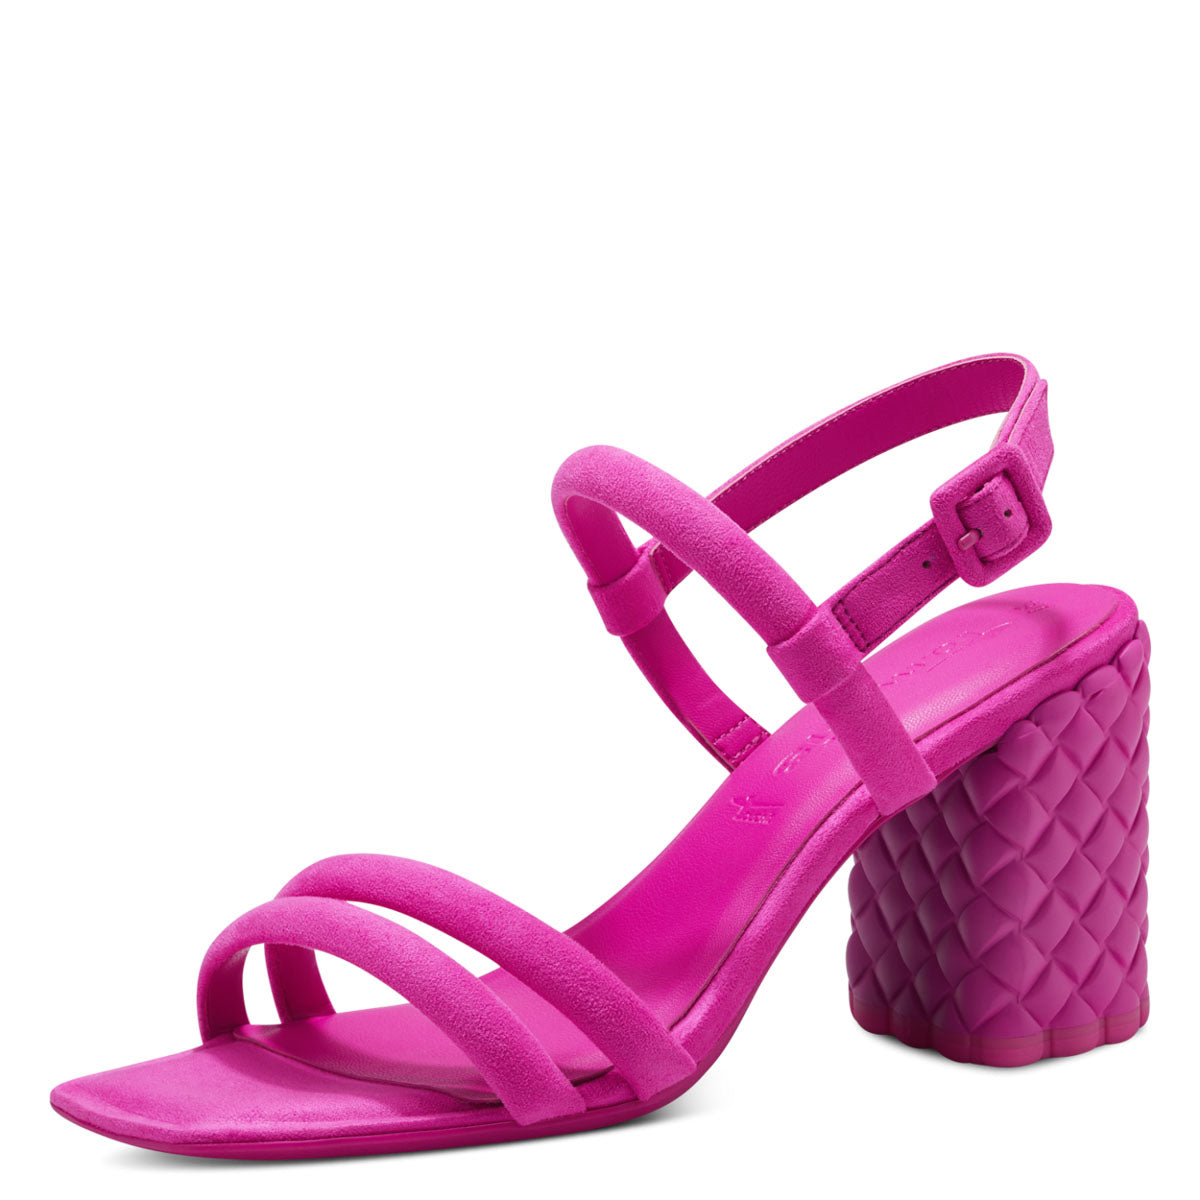 Bold Hot Pink Faux Suede Sandals